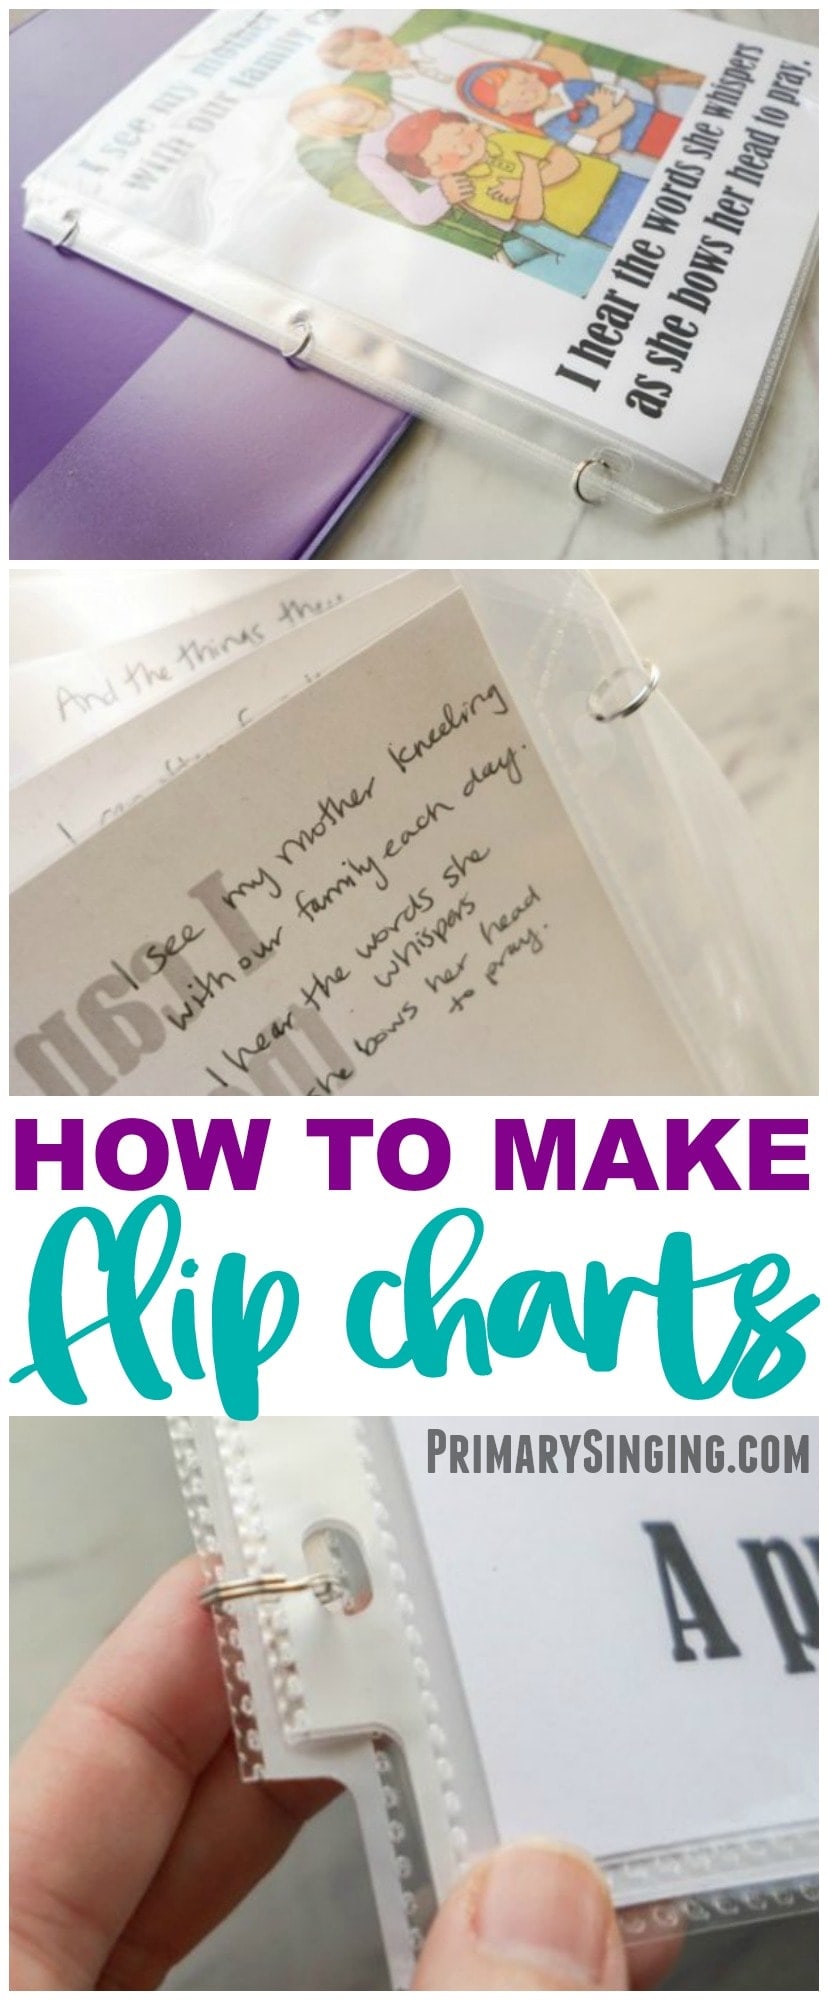 How to Make Flip Charts for Primary Singing Time - great resource for music leaders and Primary choristers! #lds #primary #musicleader #primarychorister #chorister #imamormon